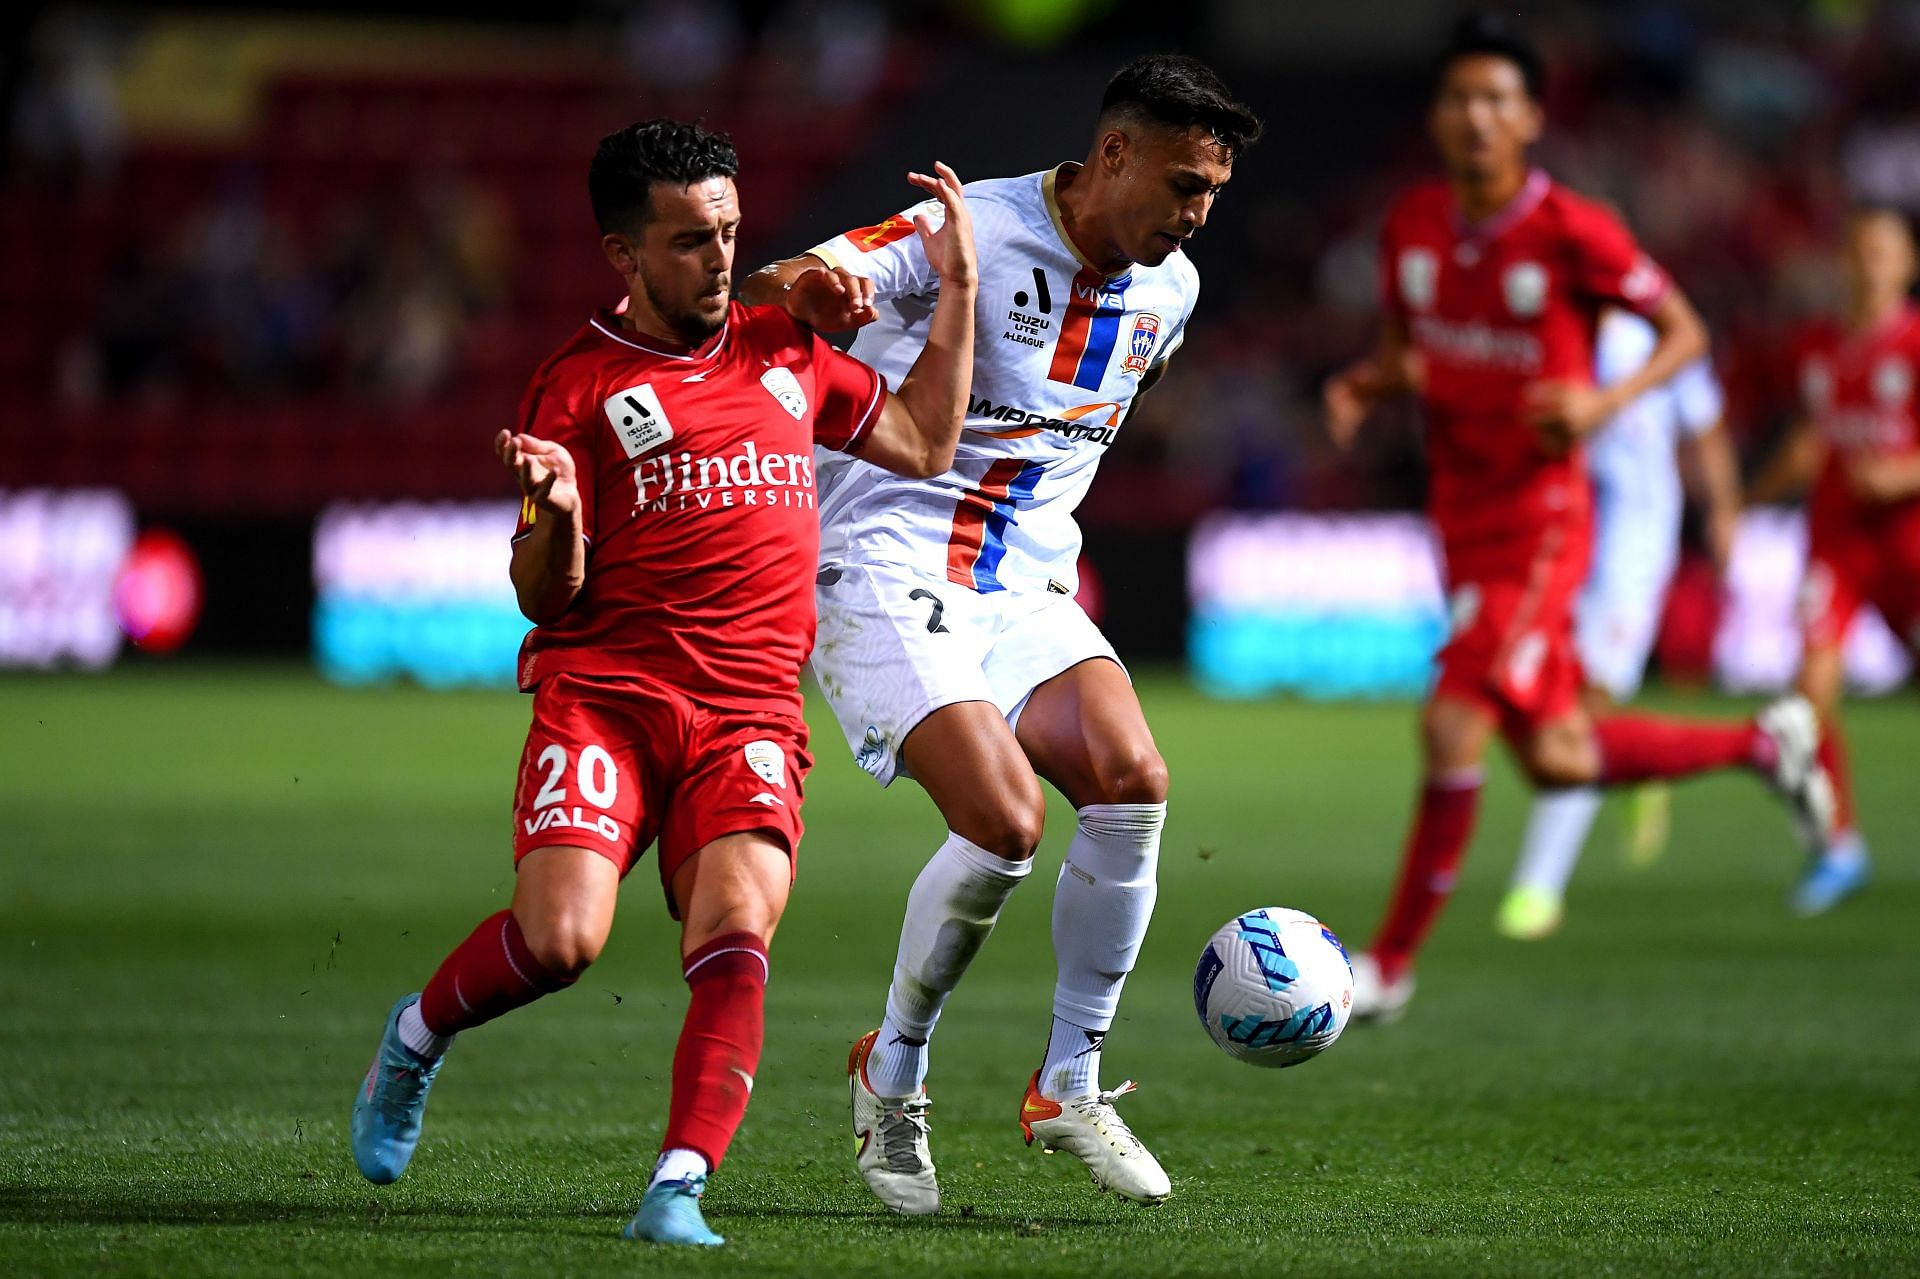 Adelaide United take on Newcastle Jets this weekend